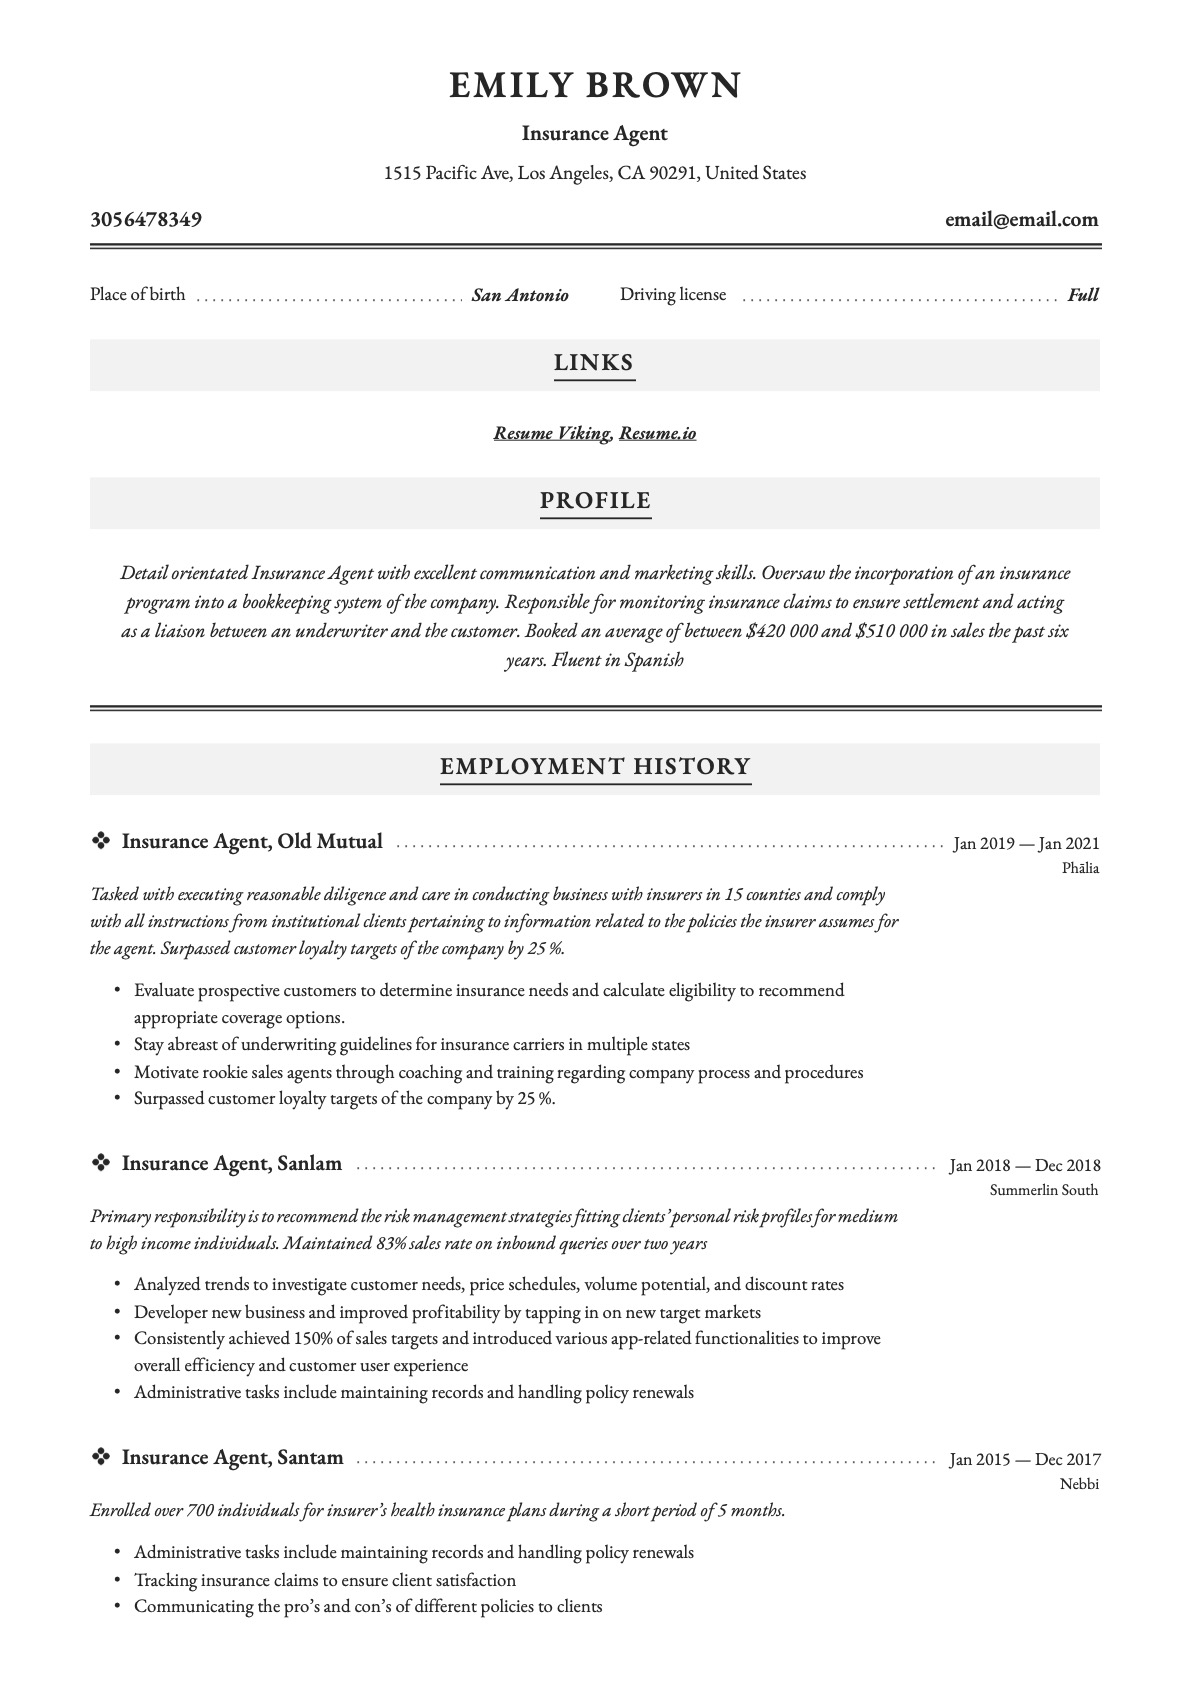 Example resume insurance agent-10